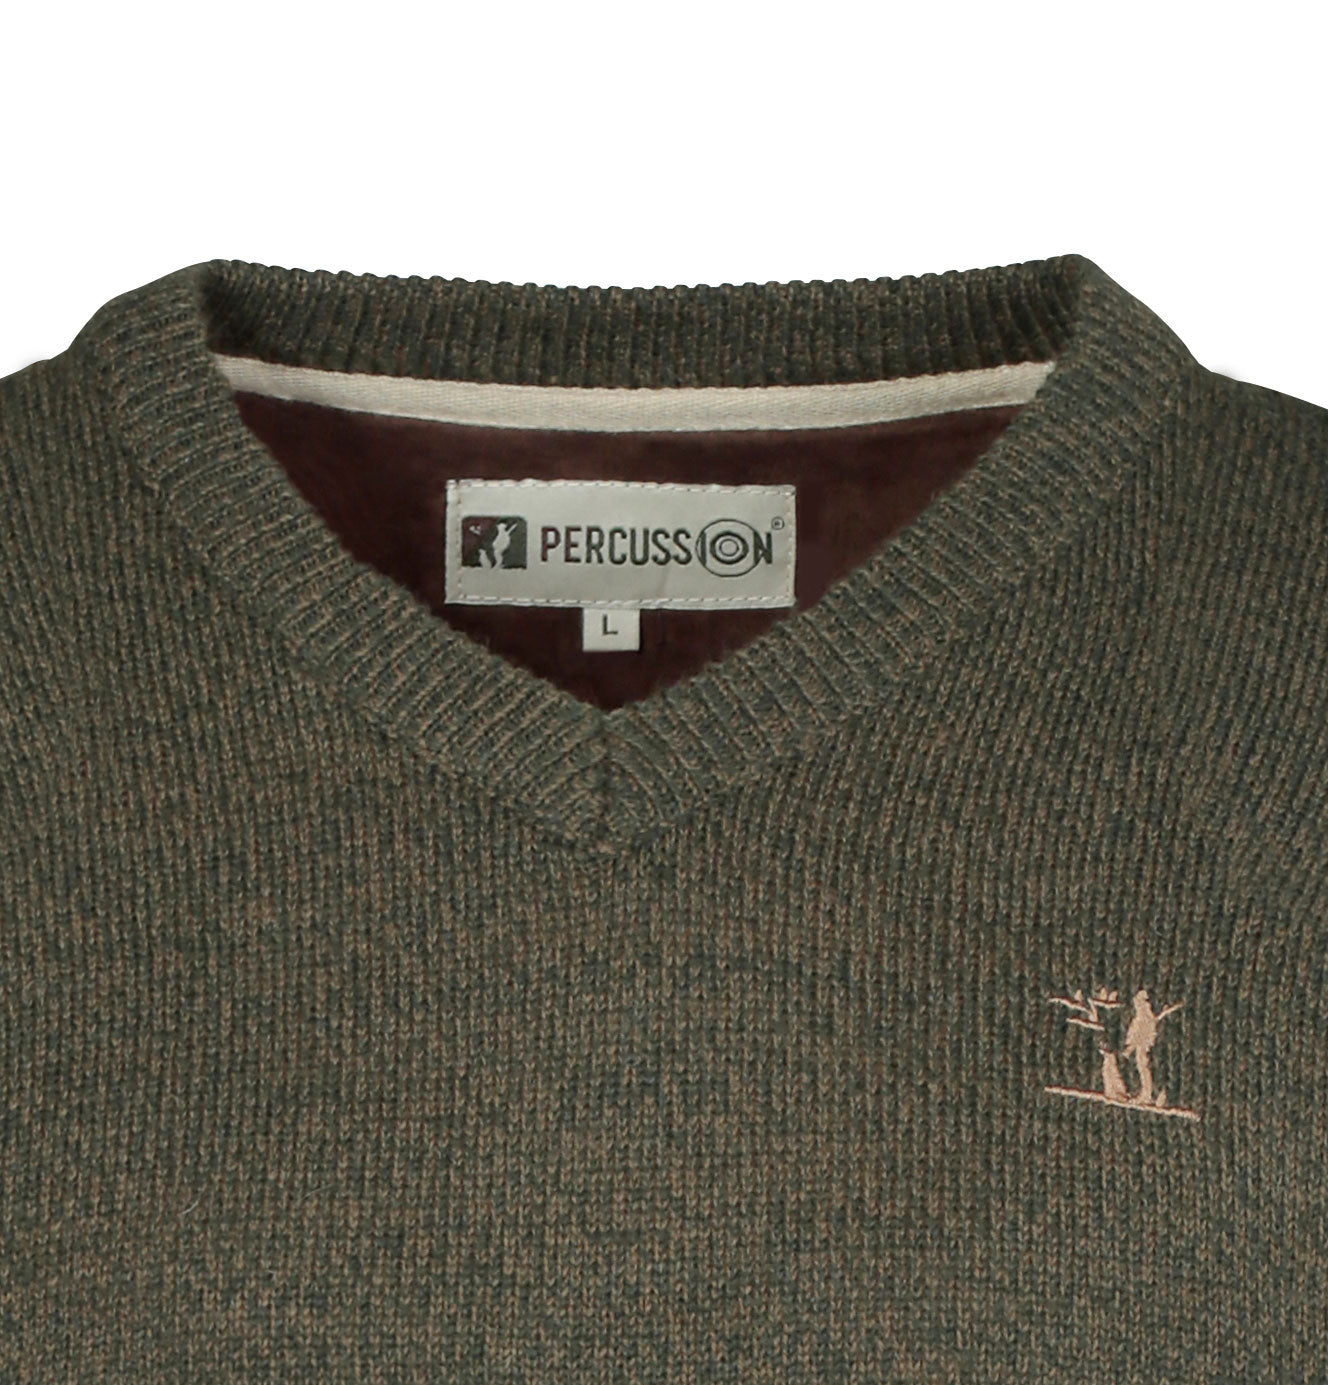 Vee neck detail Percussion Sweater